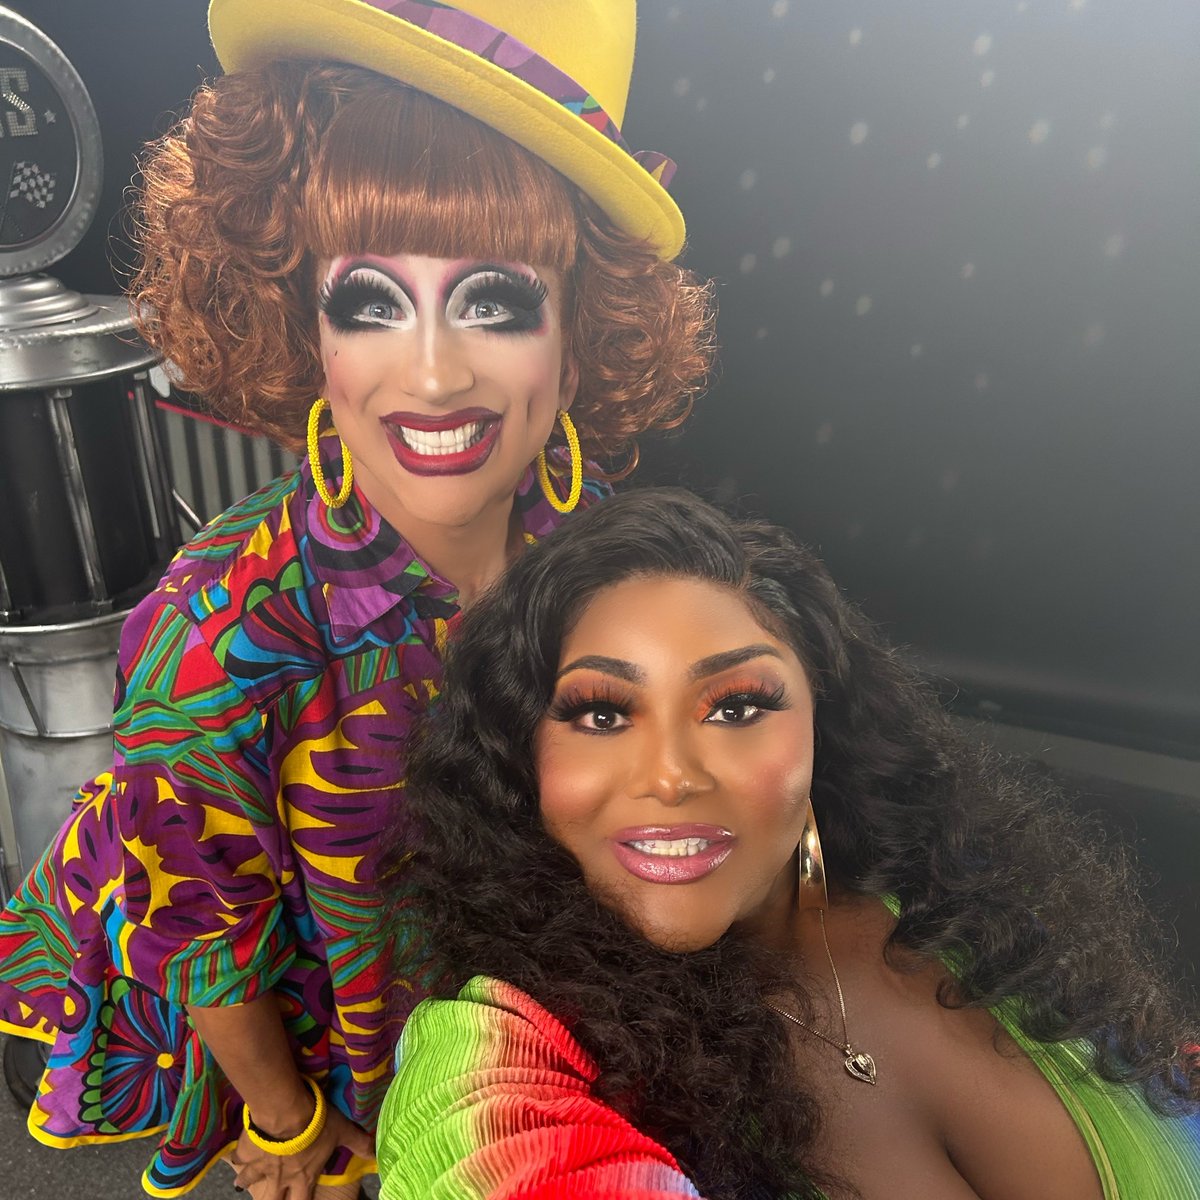 Maddie mob, where you at? 💅😉

The fabulous @TsMadisonatl1 joins @TheBiancaDelRio at #ThePitStop TOMORROW to dish on #AllStars8! 👑